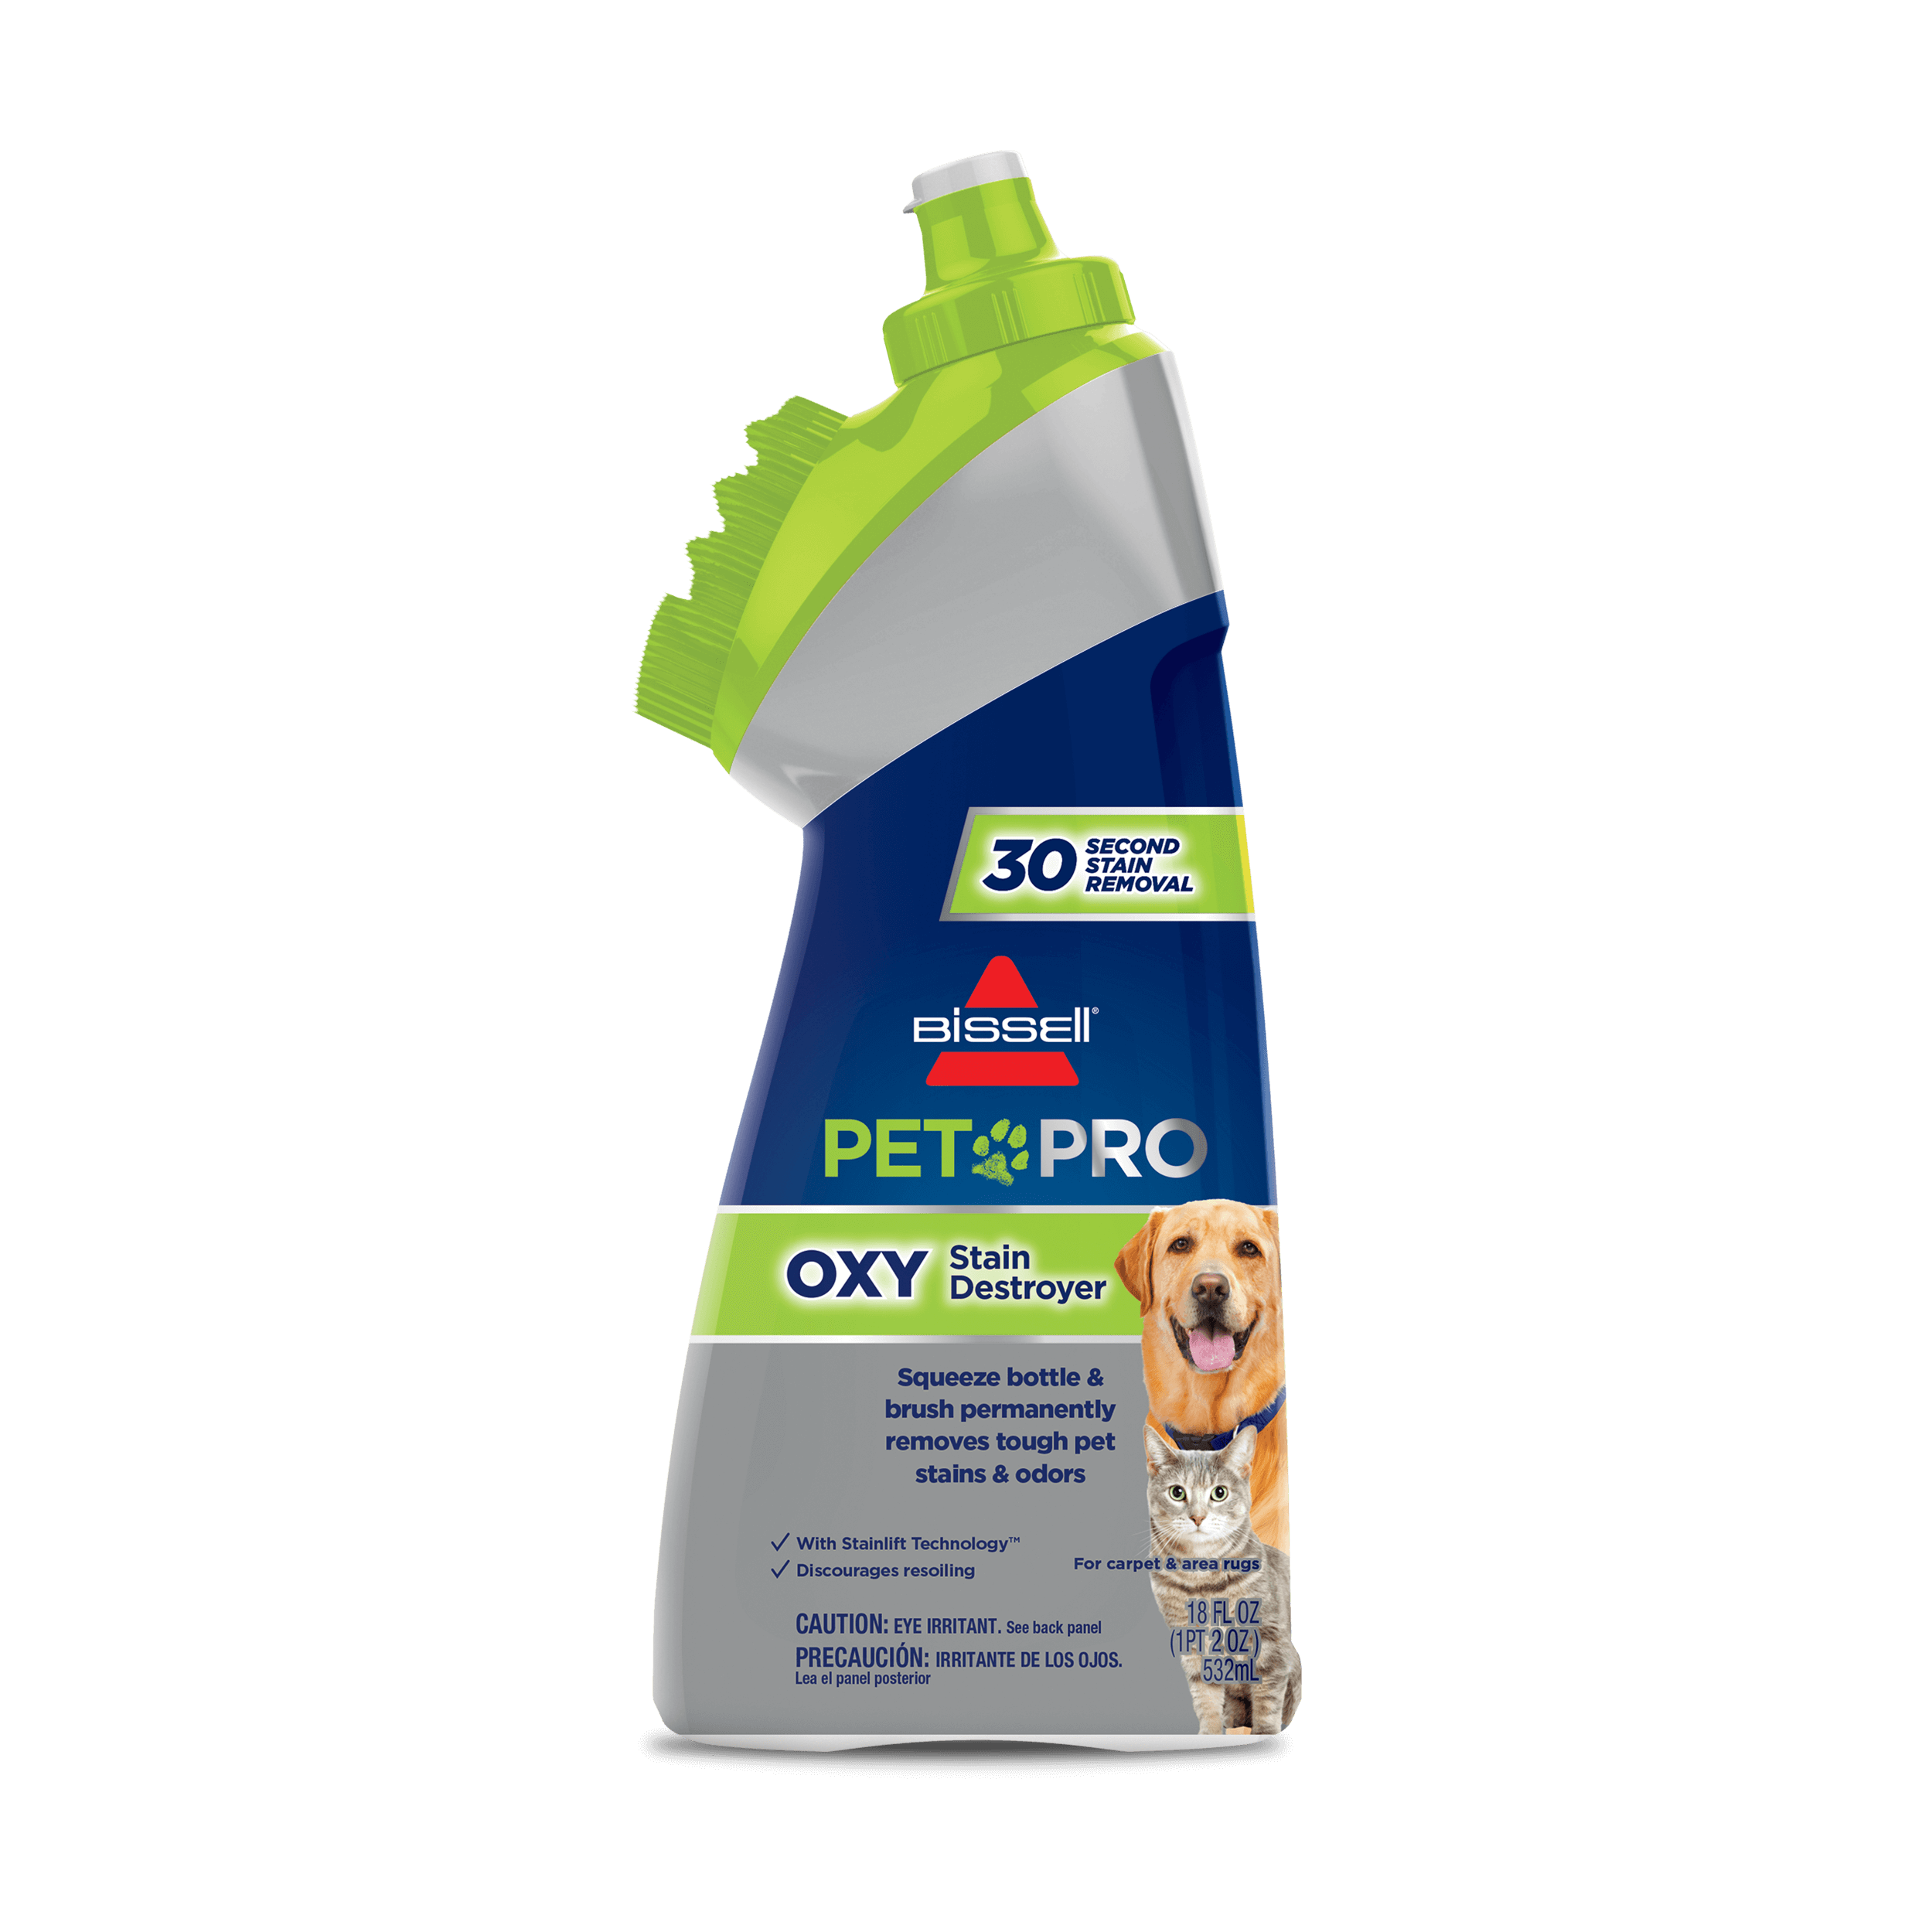 BISSELL PET PRO OXY Stain Destroyer 1766